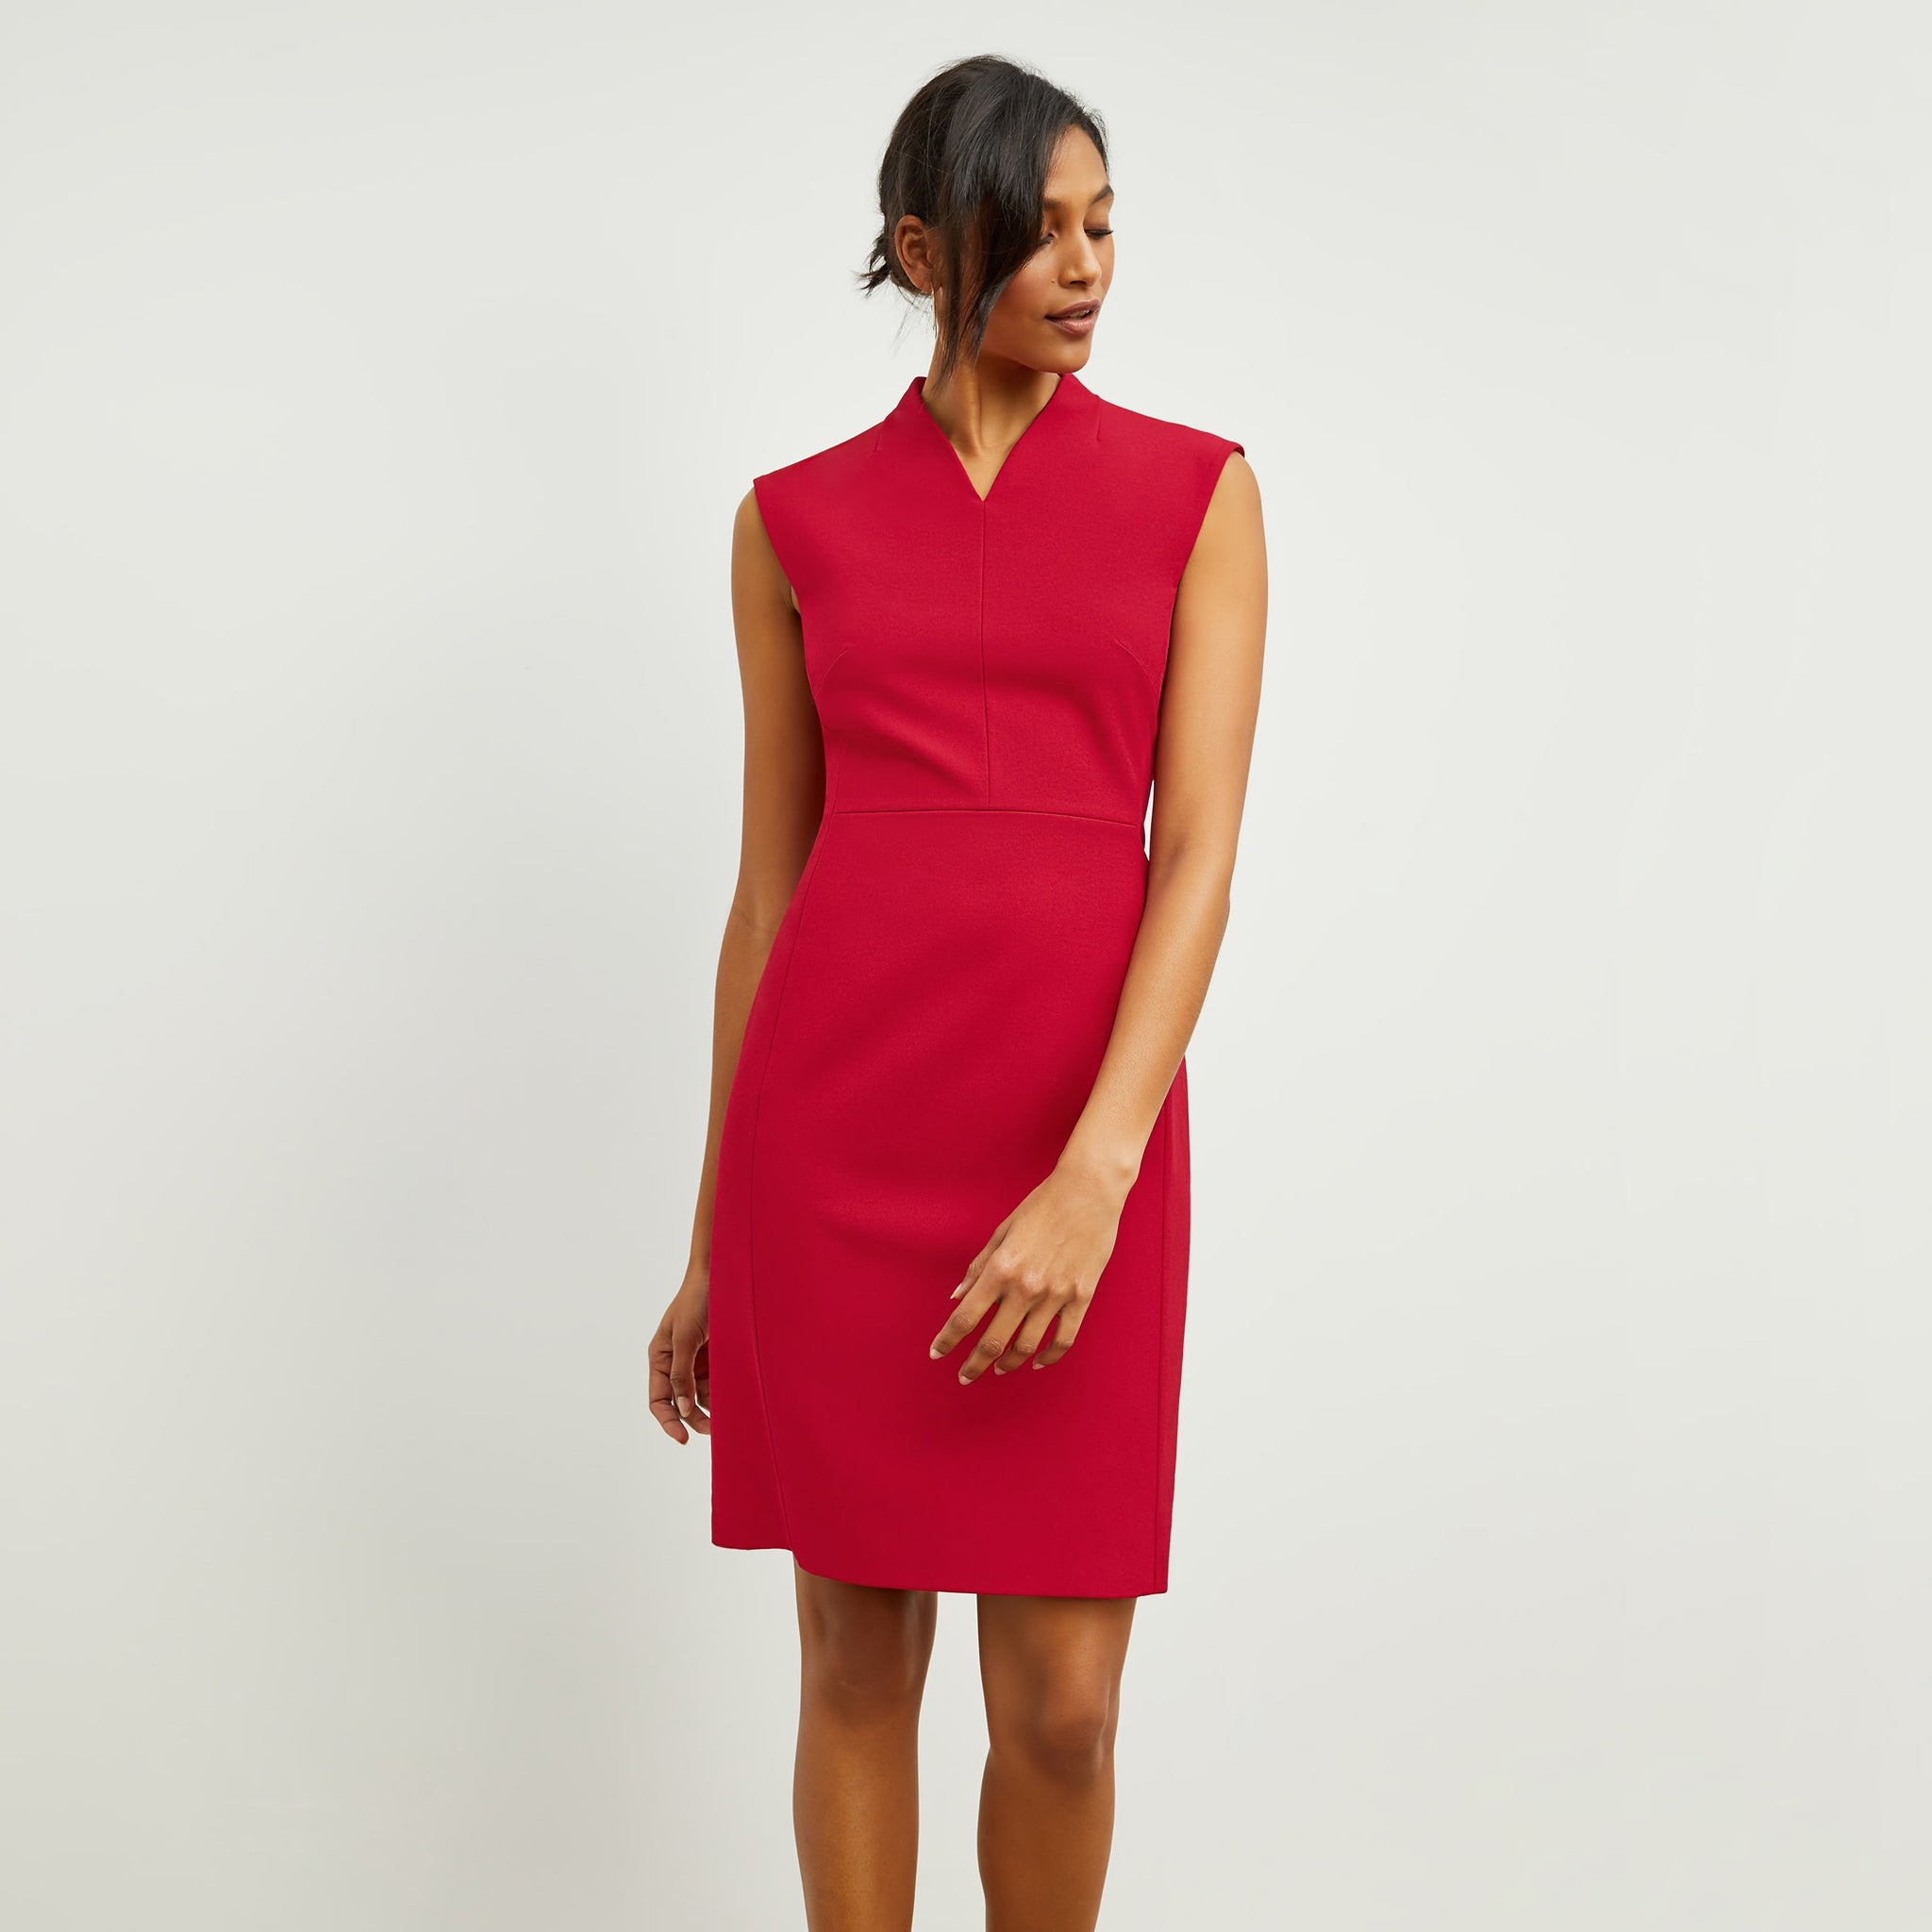 Front image of a woman standing wearing the Aditi Dress—Recycled WonderTex in Rhubarb